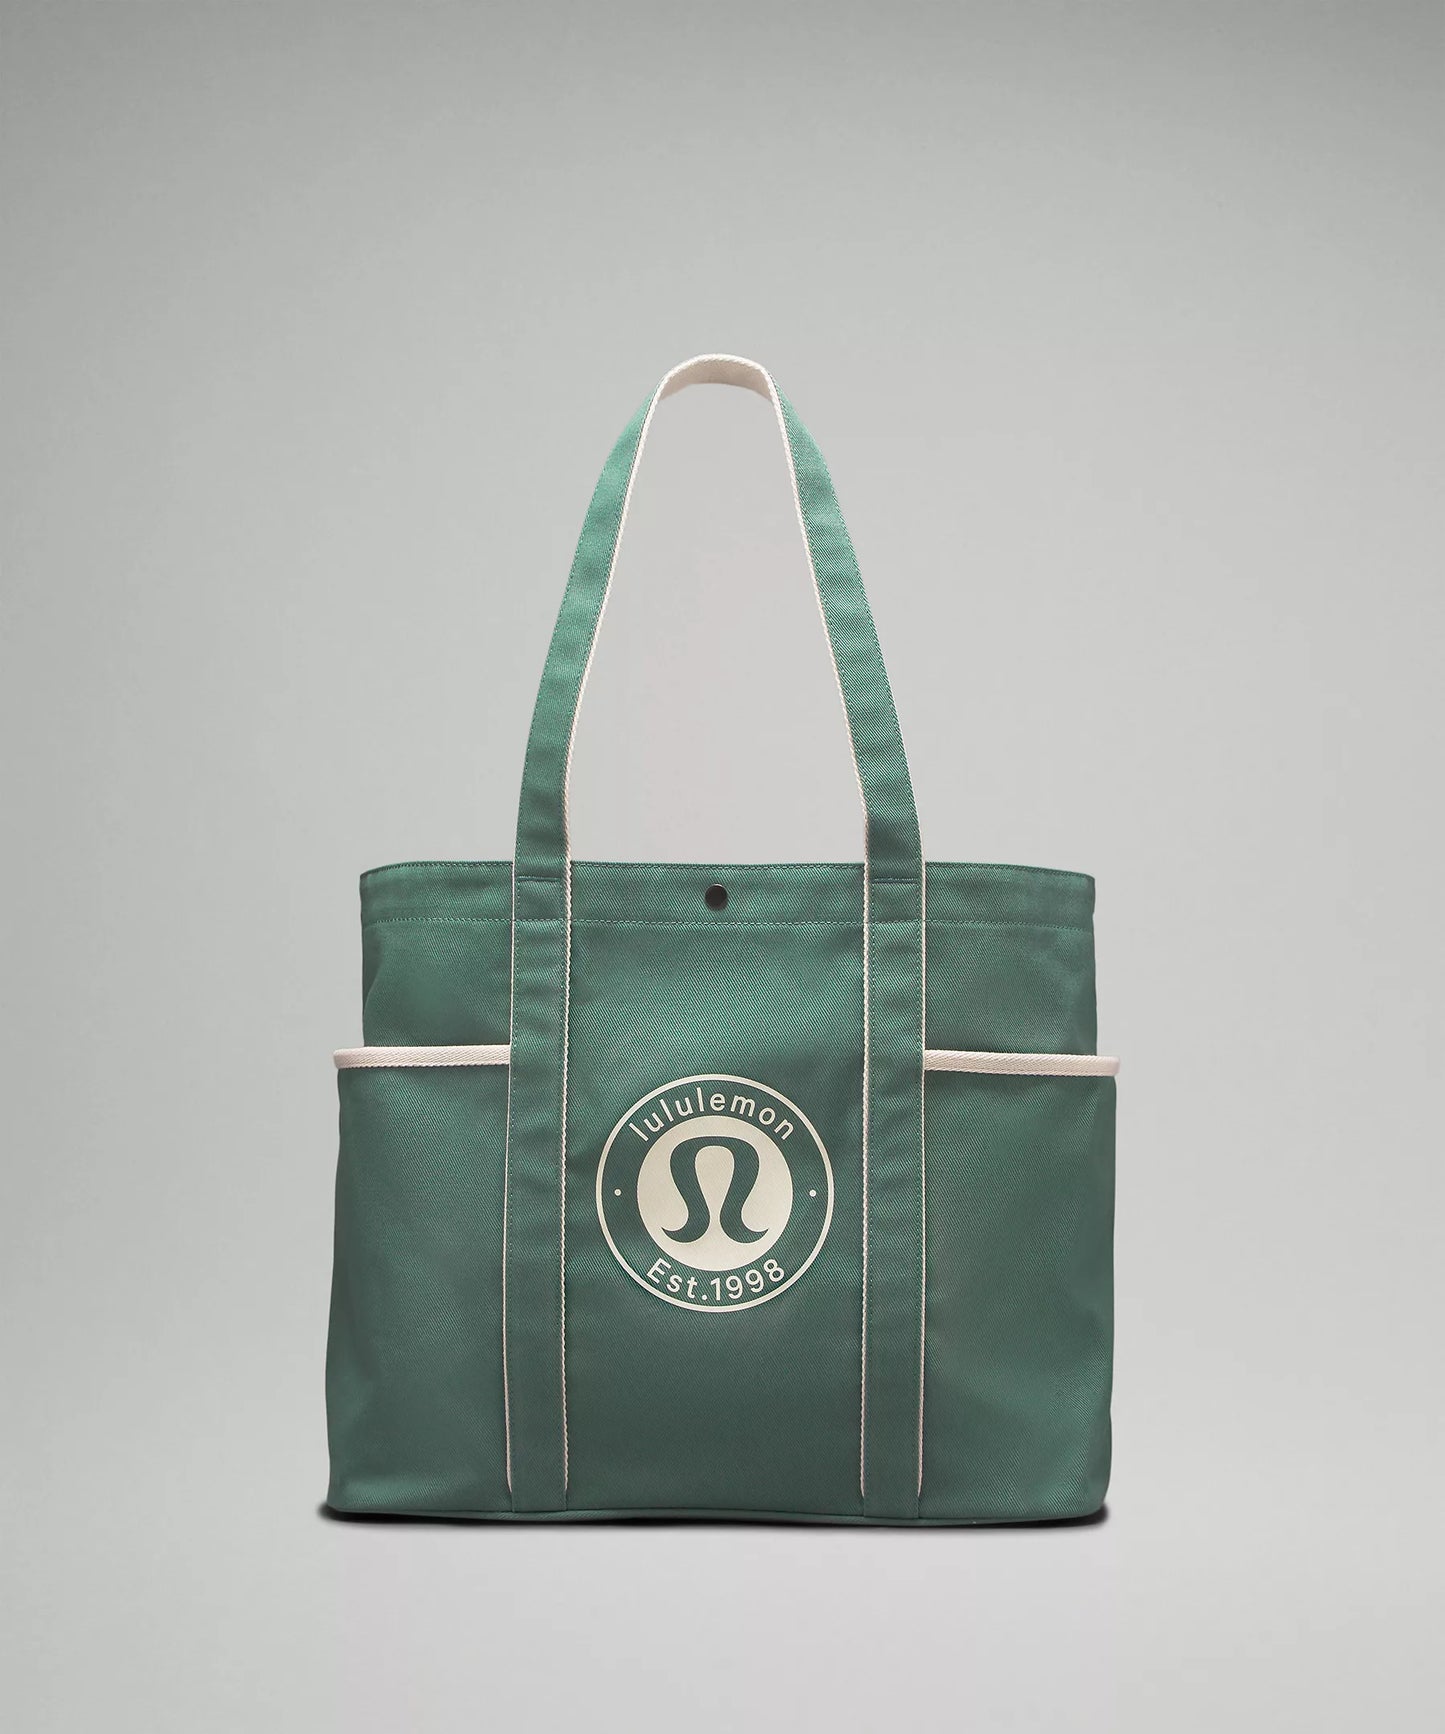 Where To Buy Lululemon's Two-Tone Canvas Tote Bag - Parade